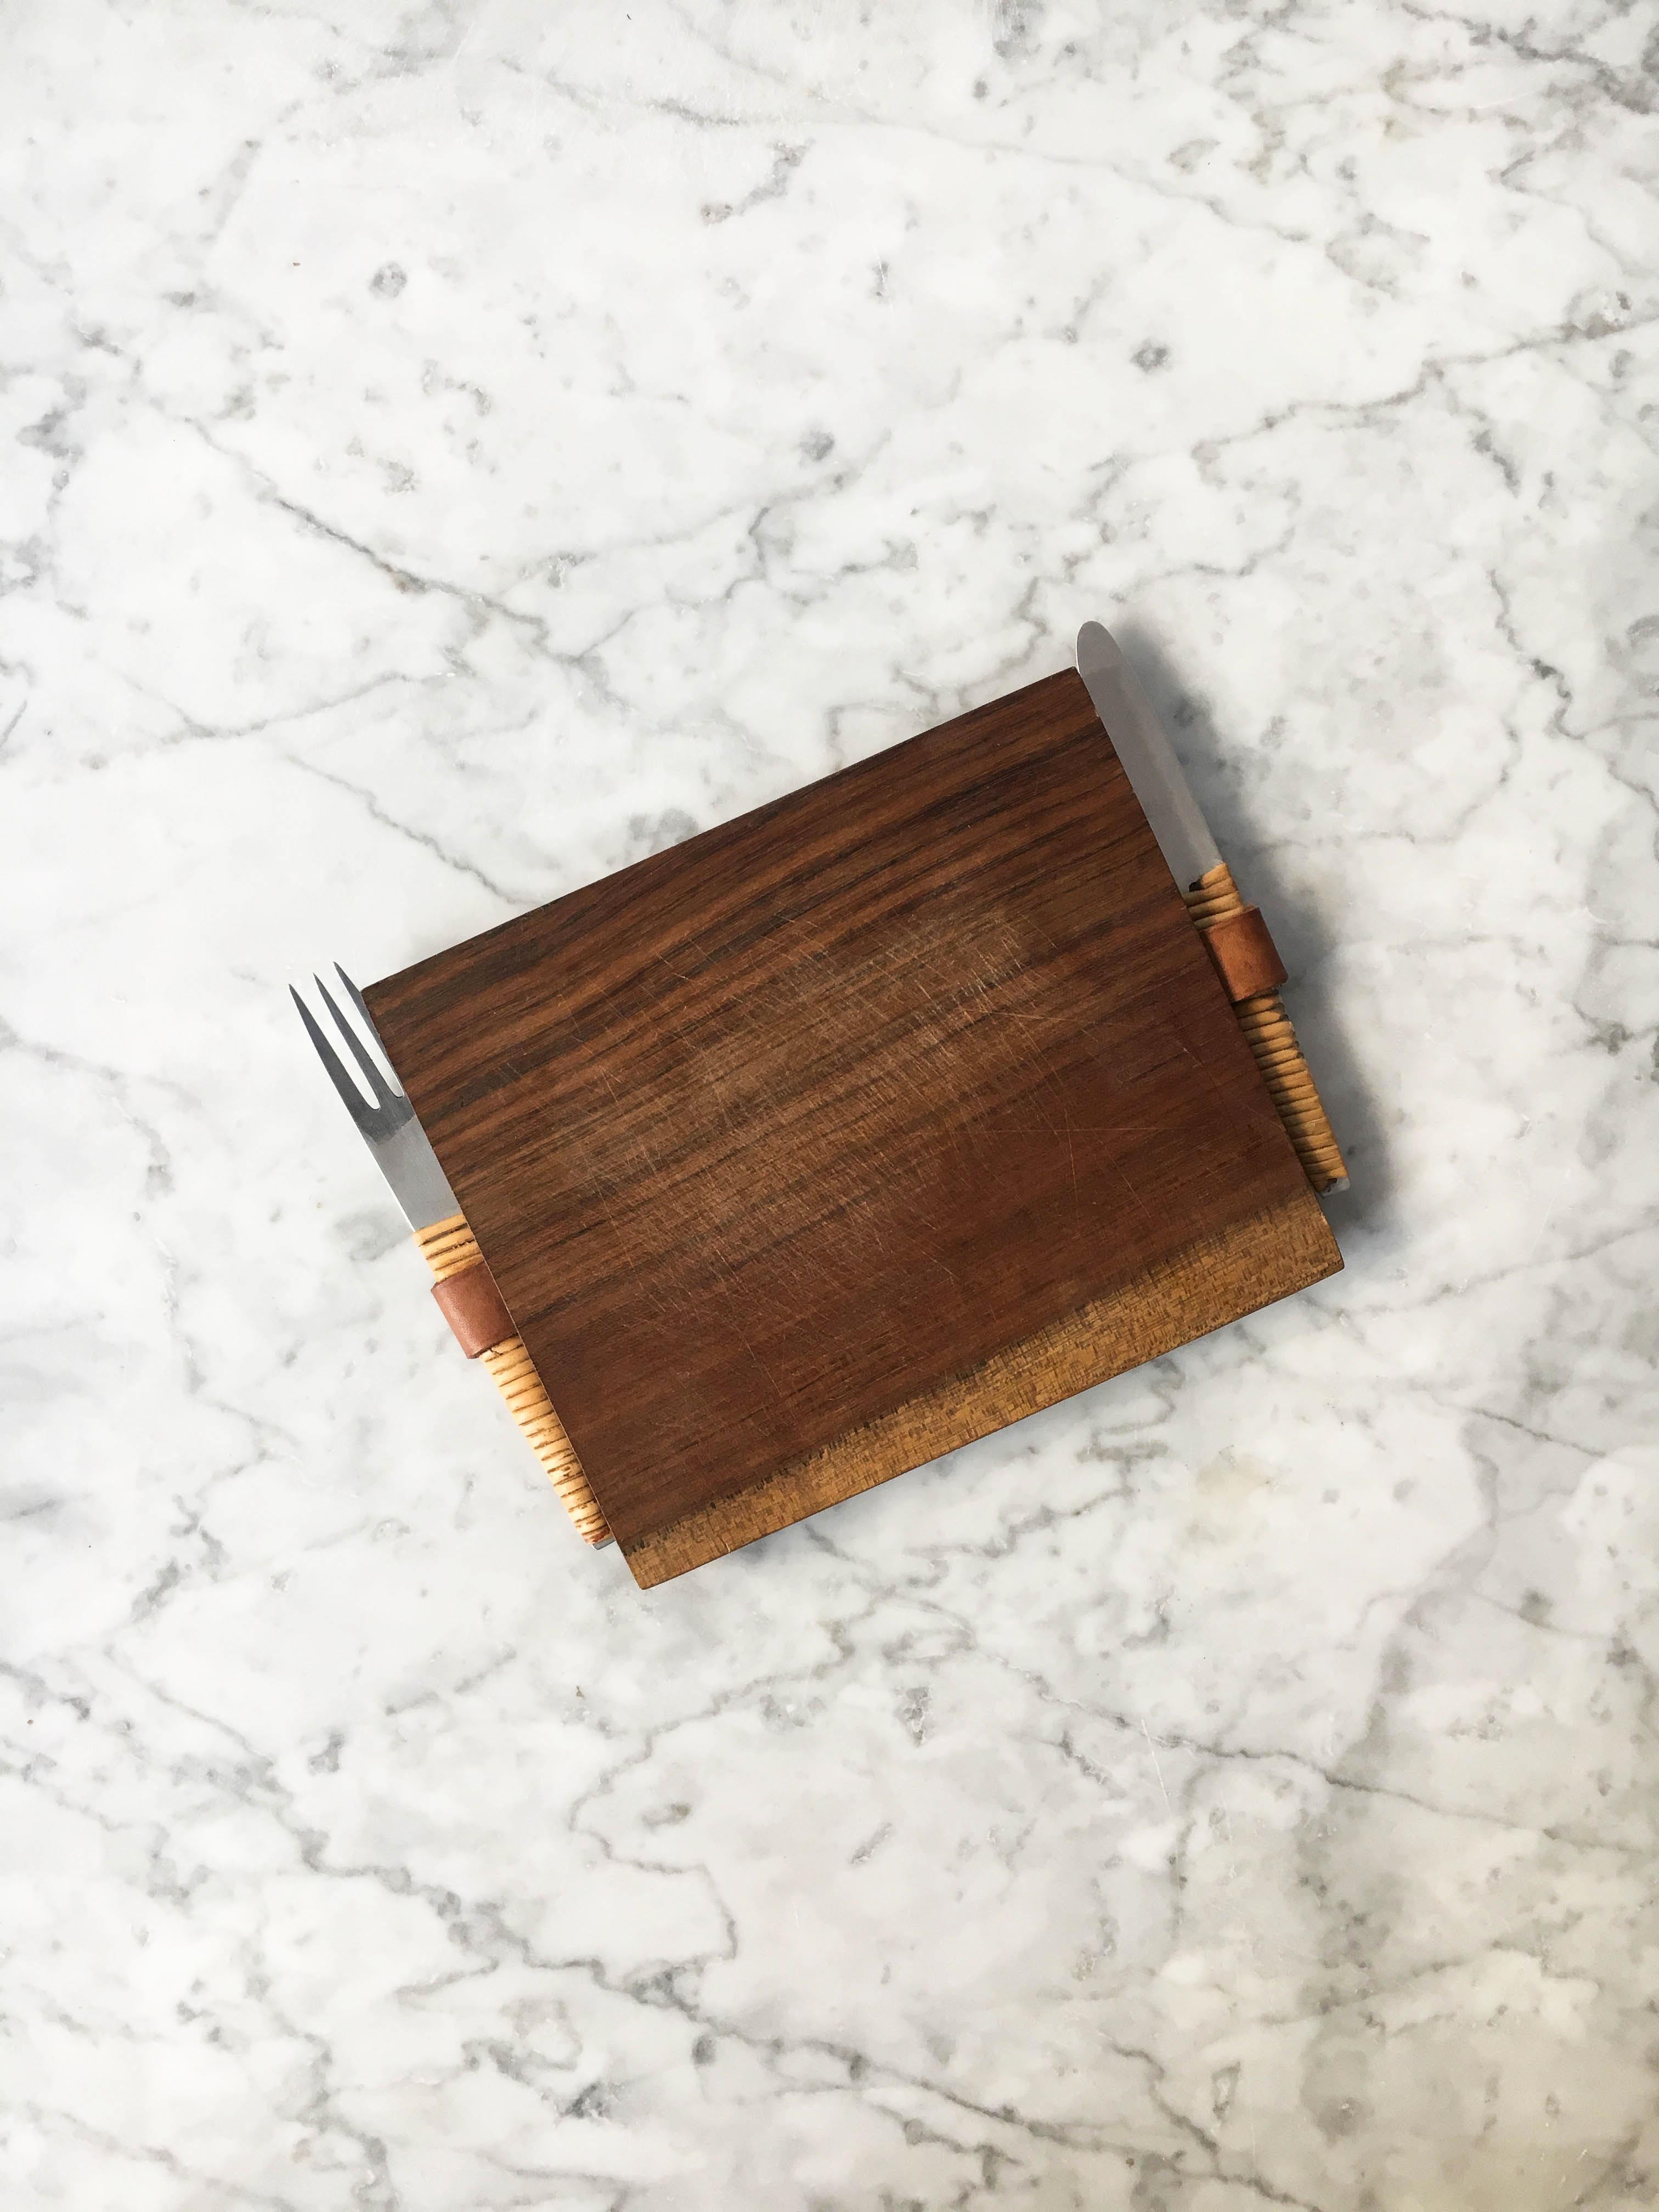 Splendid vintage picnic board with knife and fork, Austria, 1950s. The wooden cutting board has a trapezoidal shape with a leather loop, holding a cane-wrapped stainless steel knife and fork. In excellent condition with just the right amount of